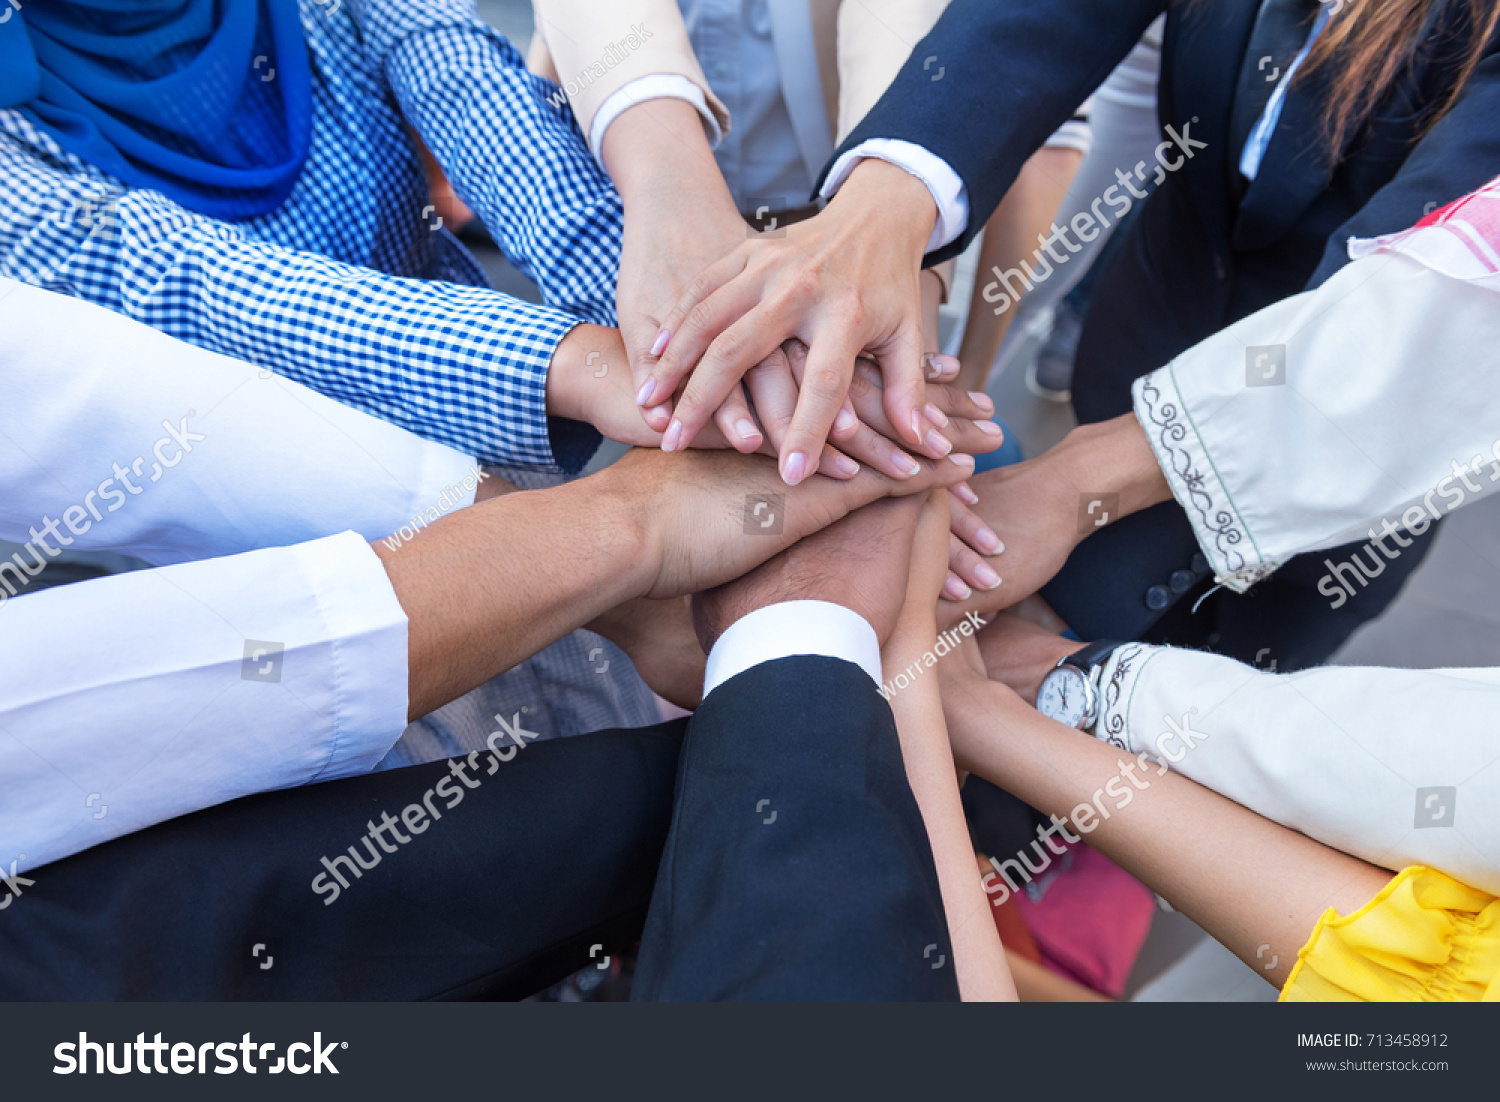 
A meeting of Arab and Asian employees to work together as a team for success. hand of the group represents teamwork. officer in company confident and work happy by agreement teamwork leader, follower #713458912